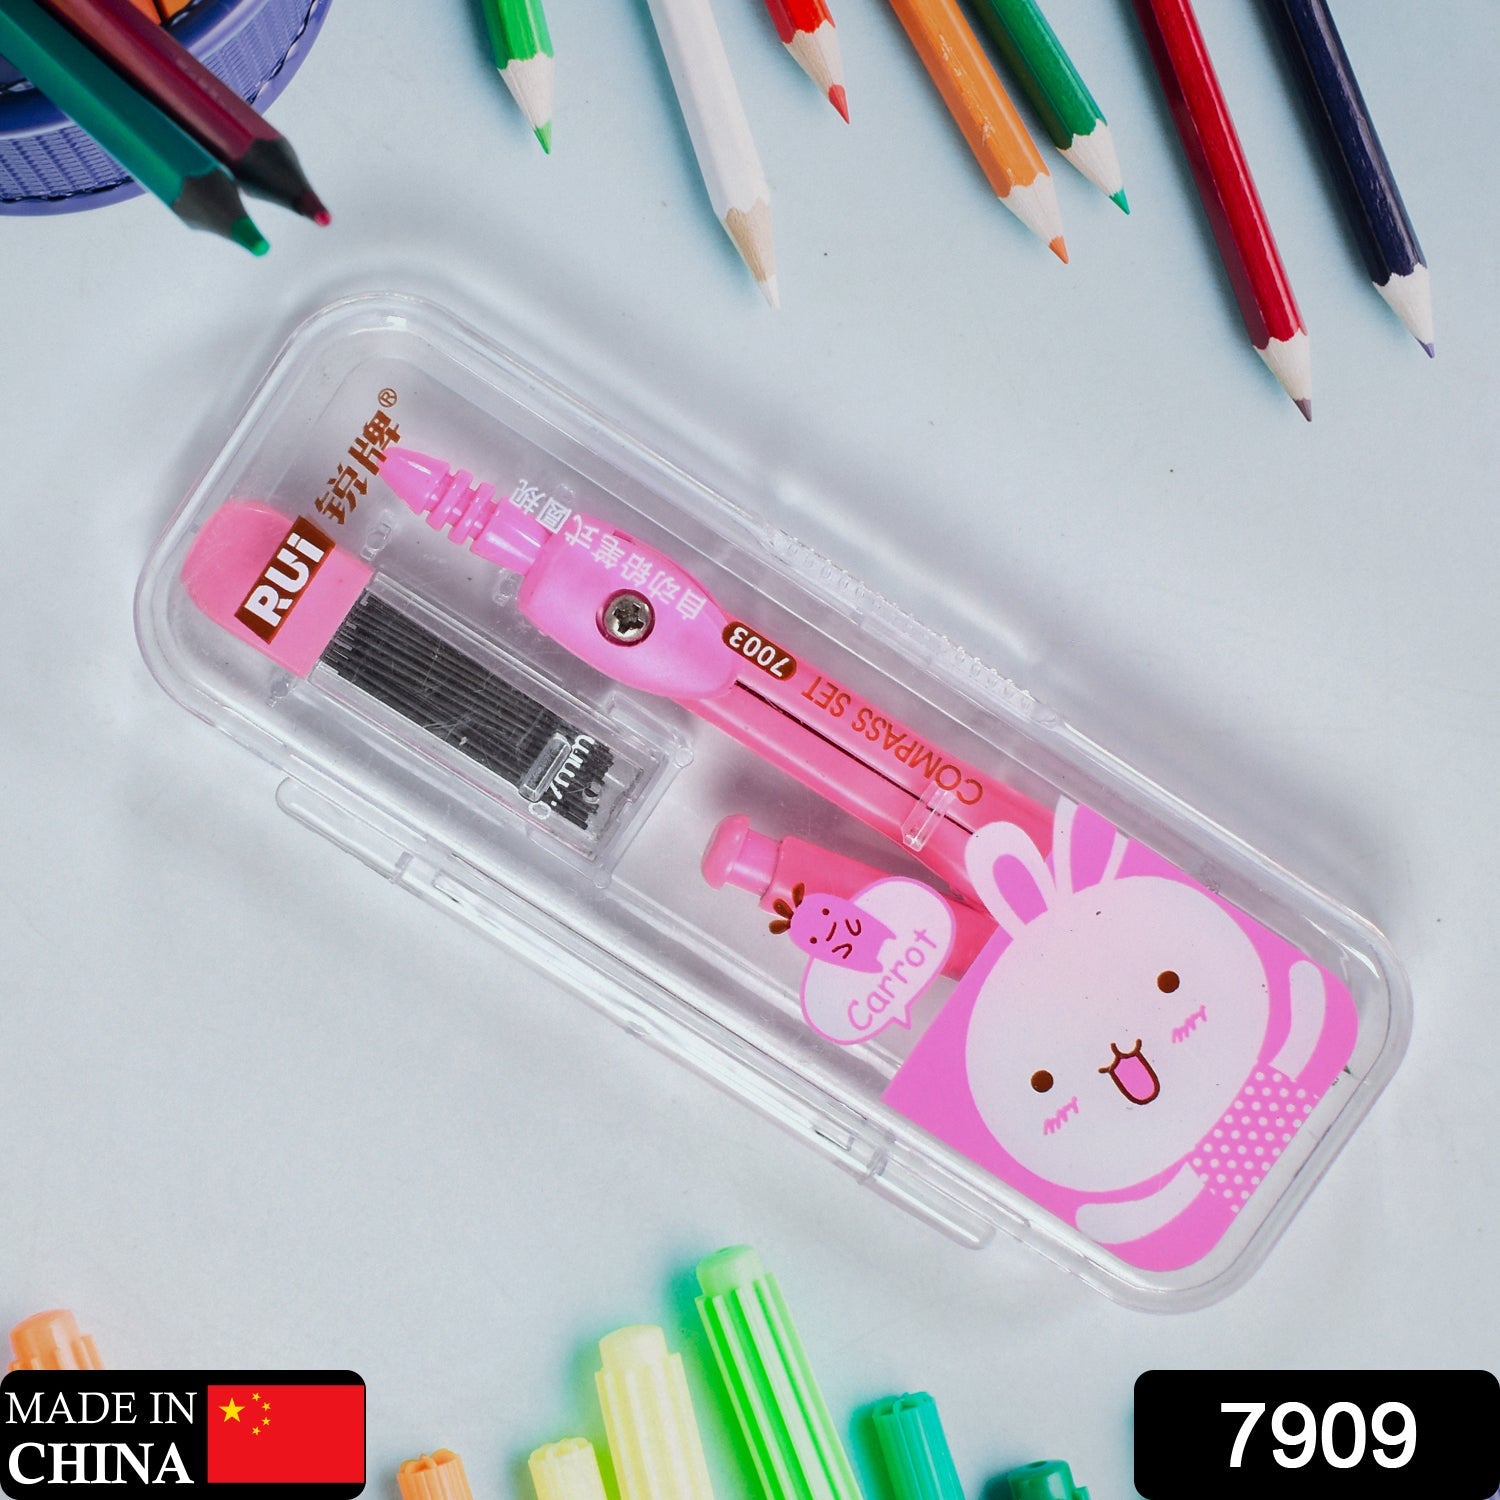 7909 Multifunctional compass Box for Boys & Girls for School, Small Size Cartoon Printed Pencil Case for Kids Birthday Gift. DeoDap